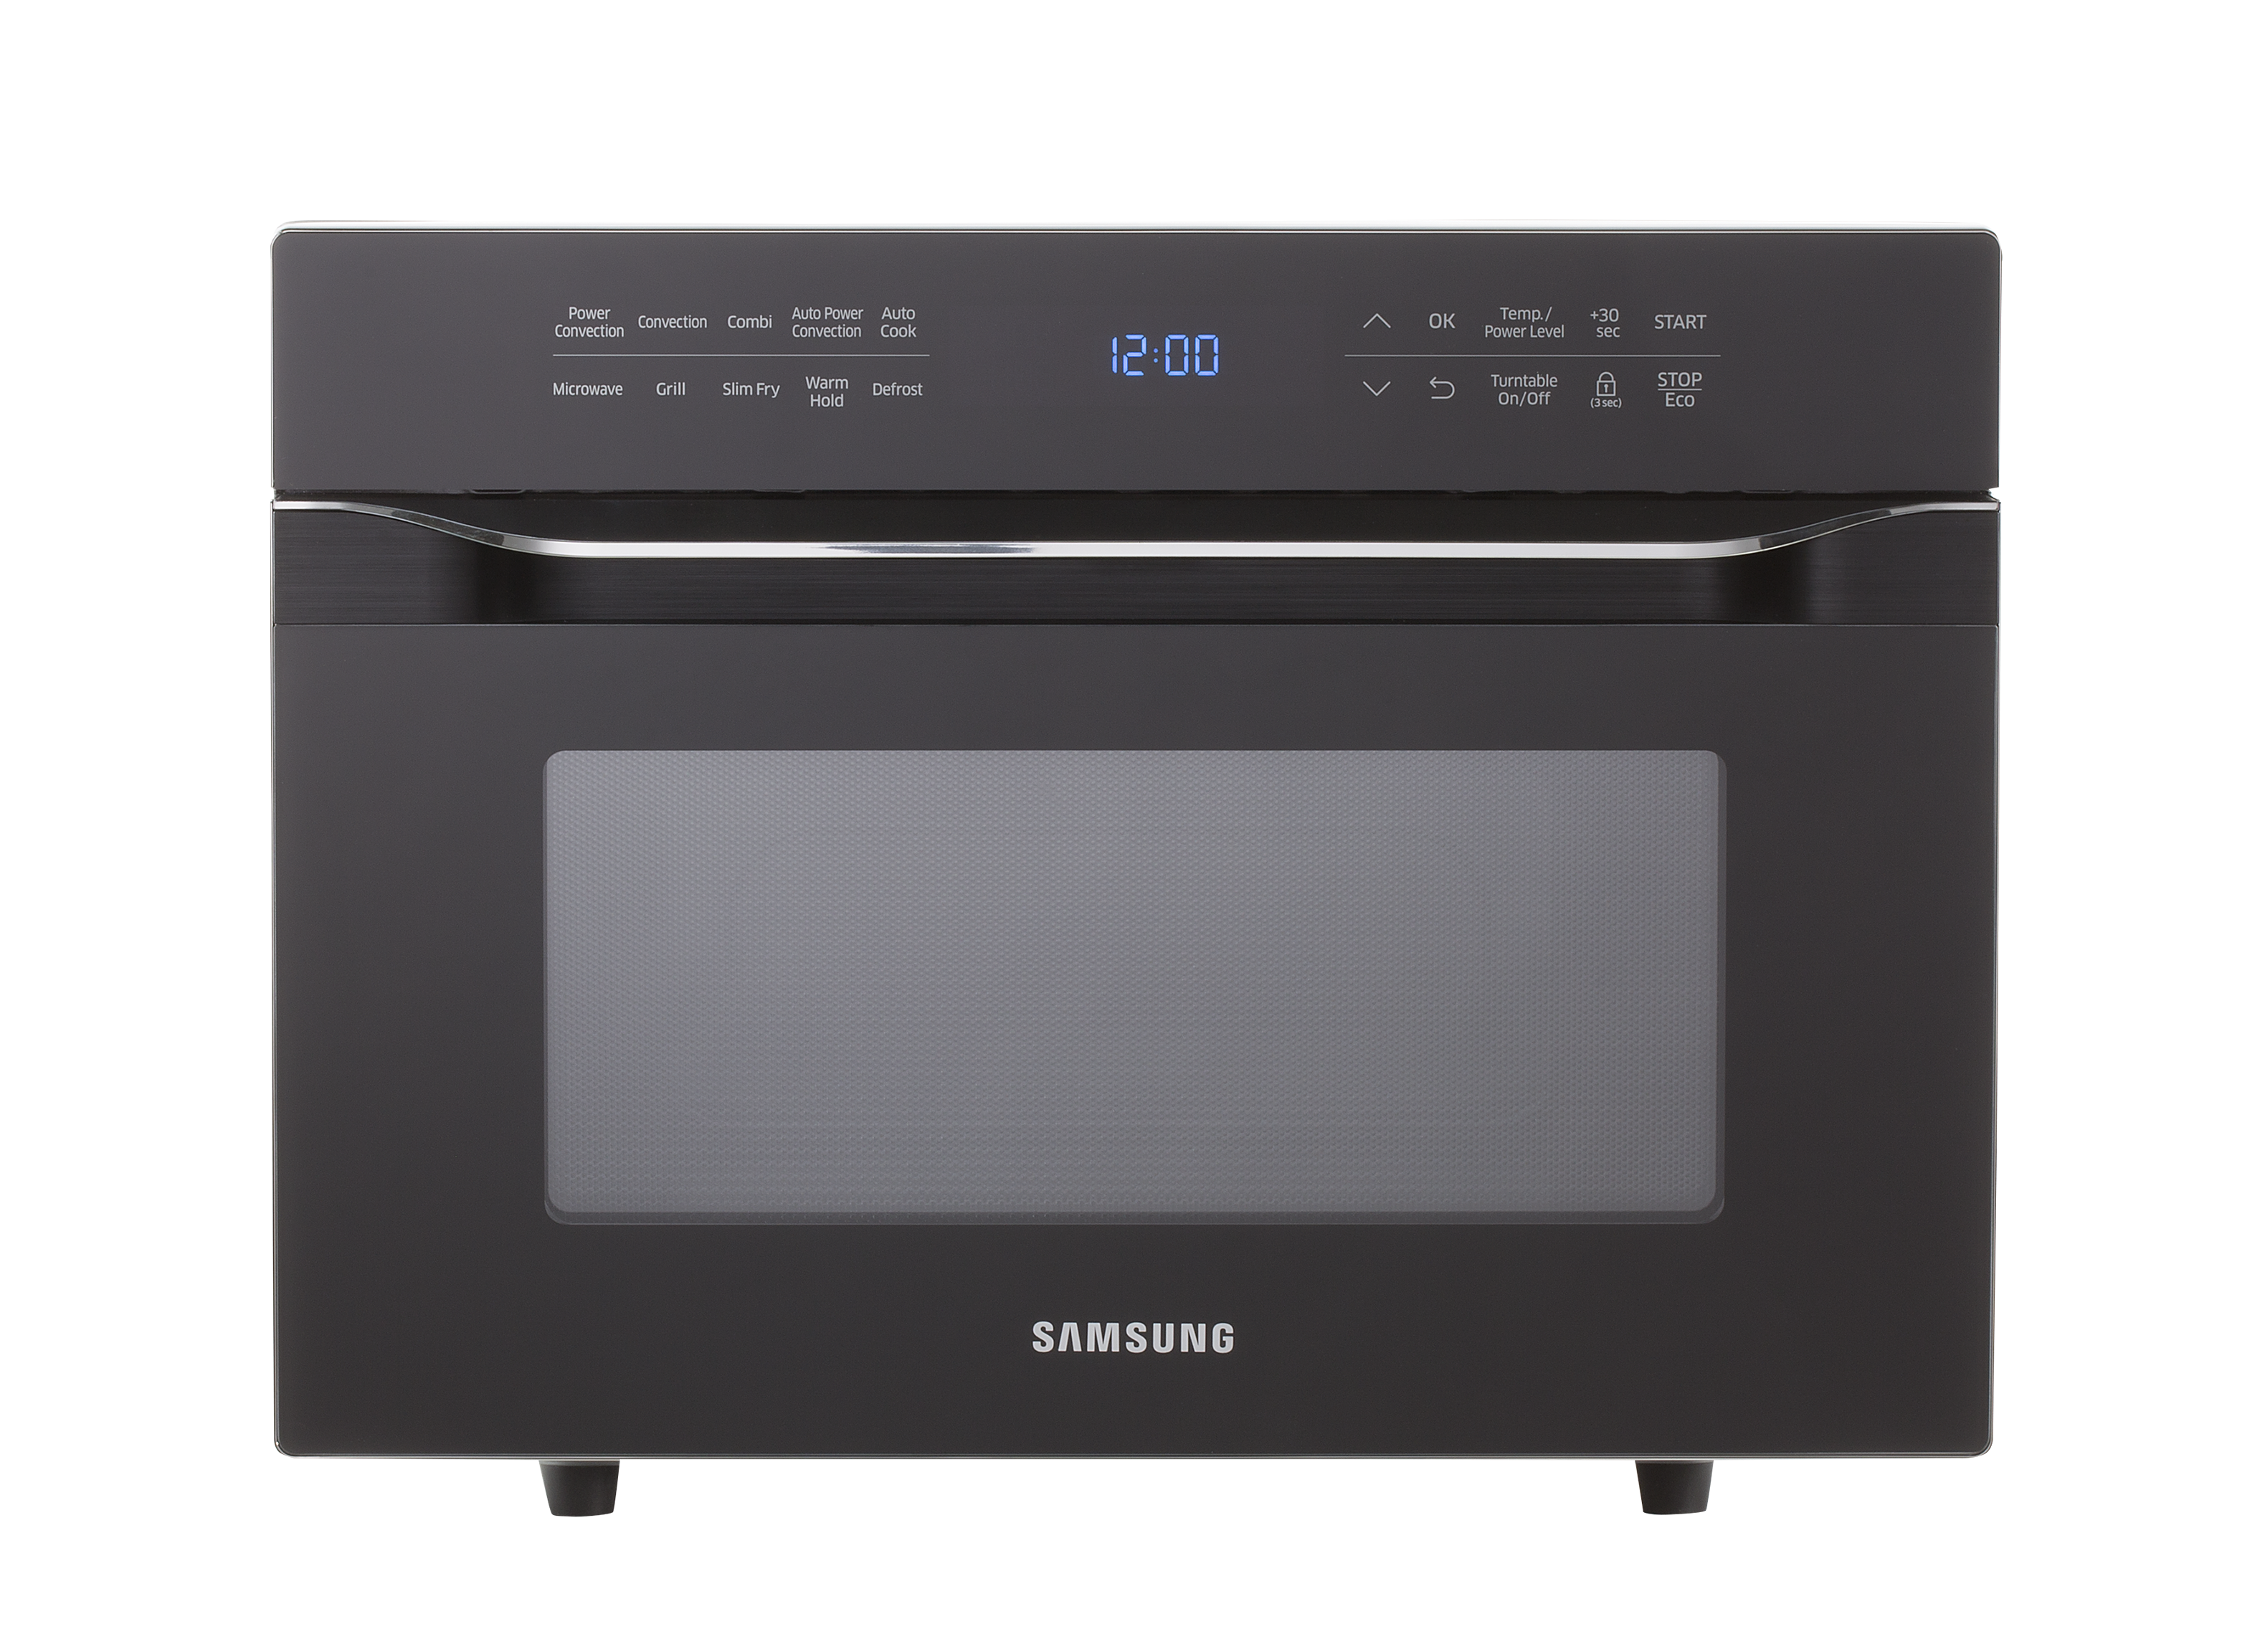 Samsung Mc12j8035ct Microwave Oven, Samsung Countertop Convection Microwave Reviews